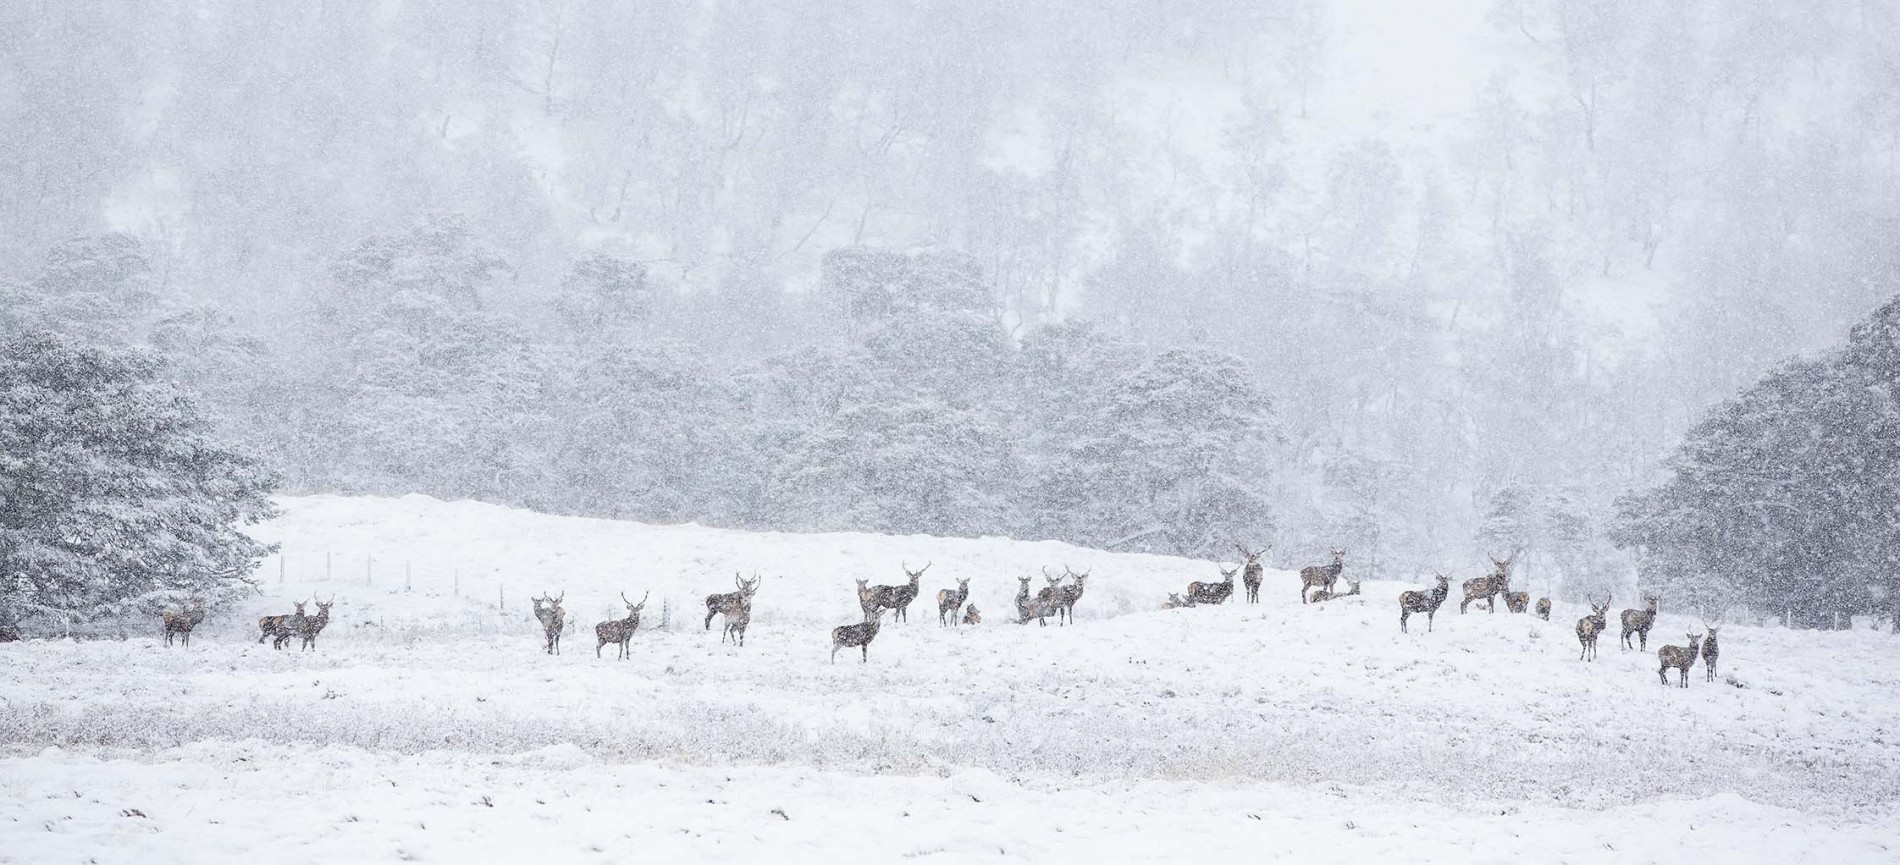 Stags in winter